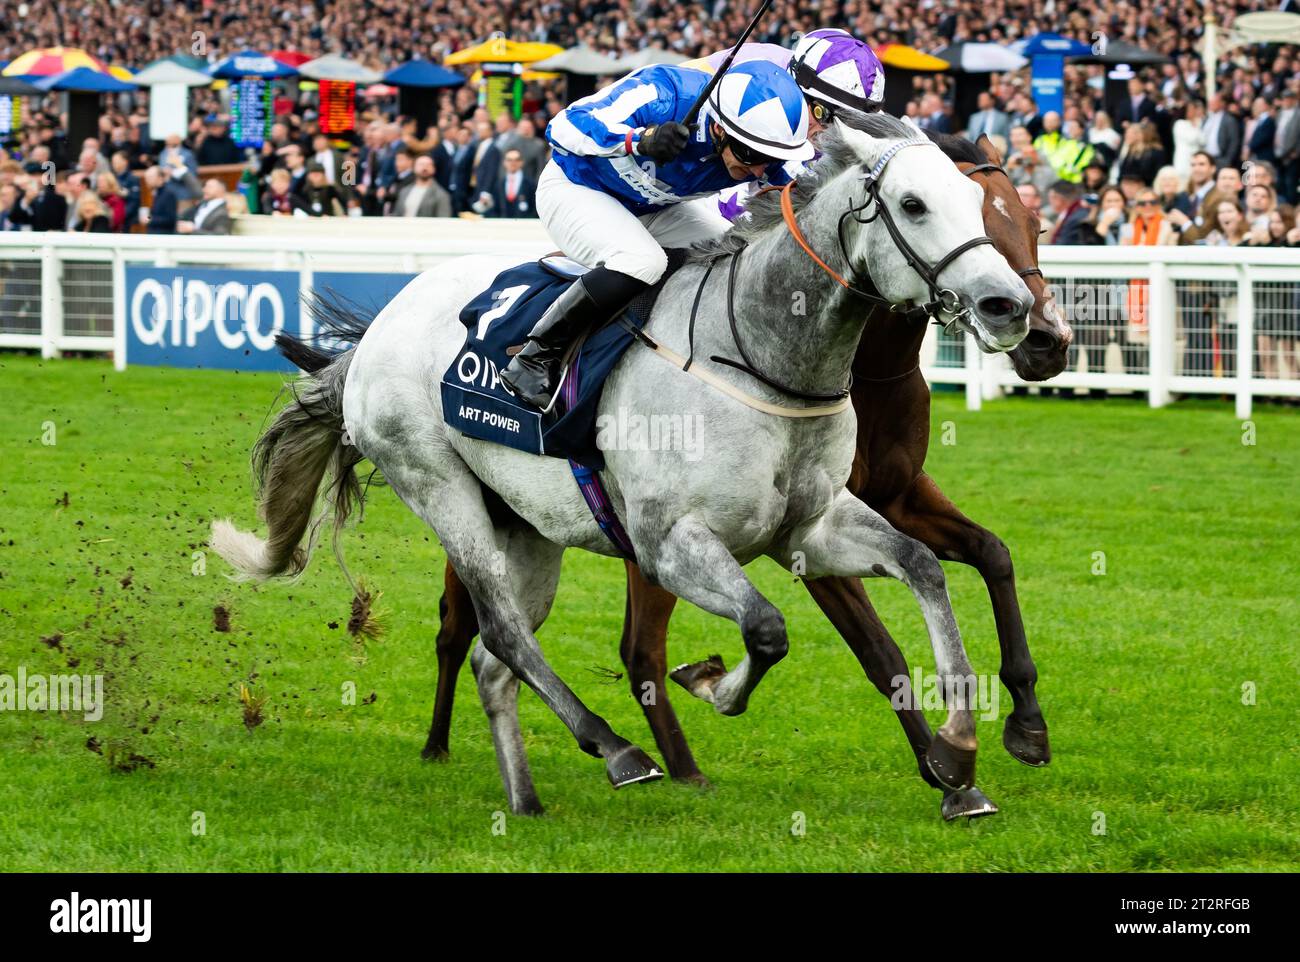 Ascot, Berkshire, United Kingdom. Saturday 21st October 2023. Art Power and David Allan win the QIPCO British Champions Sprint Stakes Group 1 for trainer Tim Easterby and owner King Power Racing Co Ltd. Credit JTW Equine Images / Alamy Live News Stock Photo